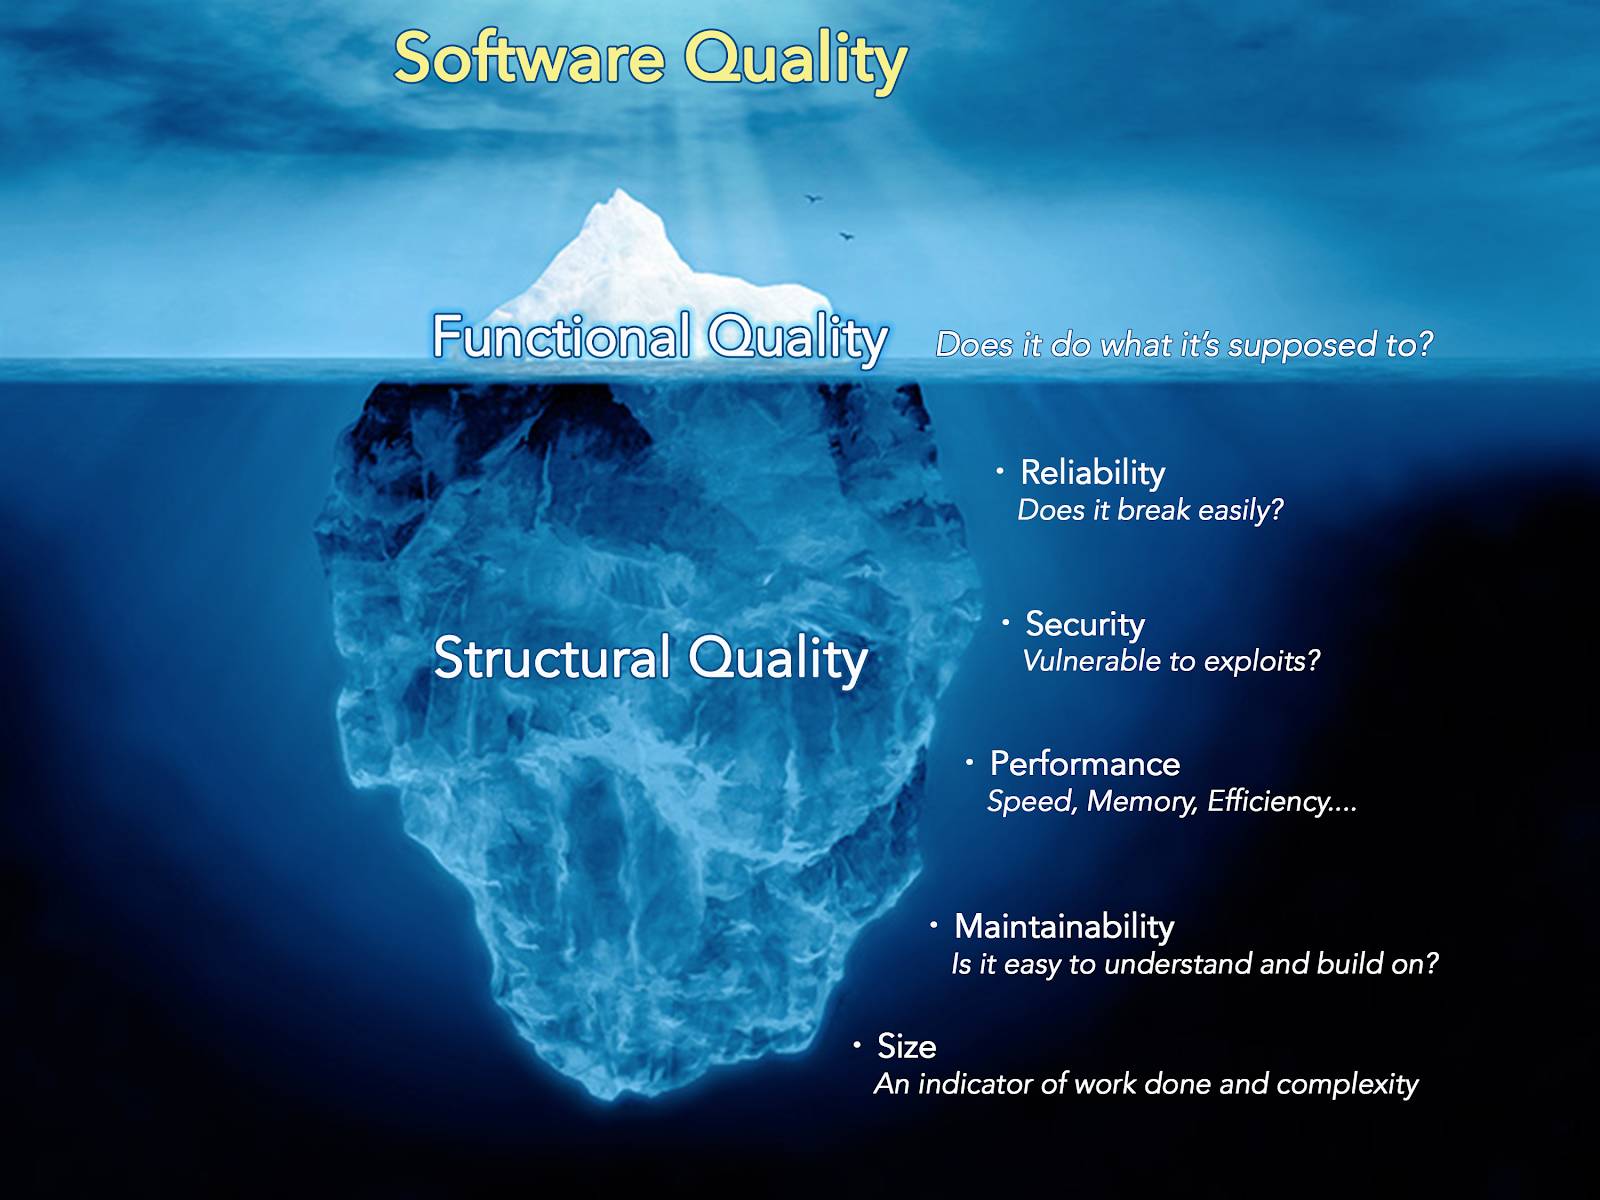 An iceberg representing the different aspects of quality. The visible portion above the water represents functional quality. The hidden portion below represents structural quality, including reliability, security, performance, maintainability, and size.